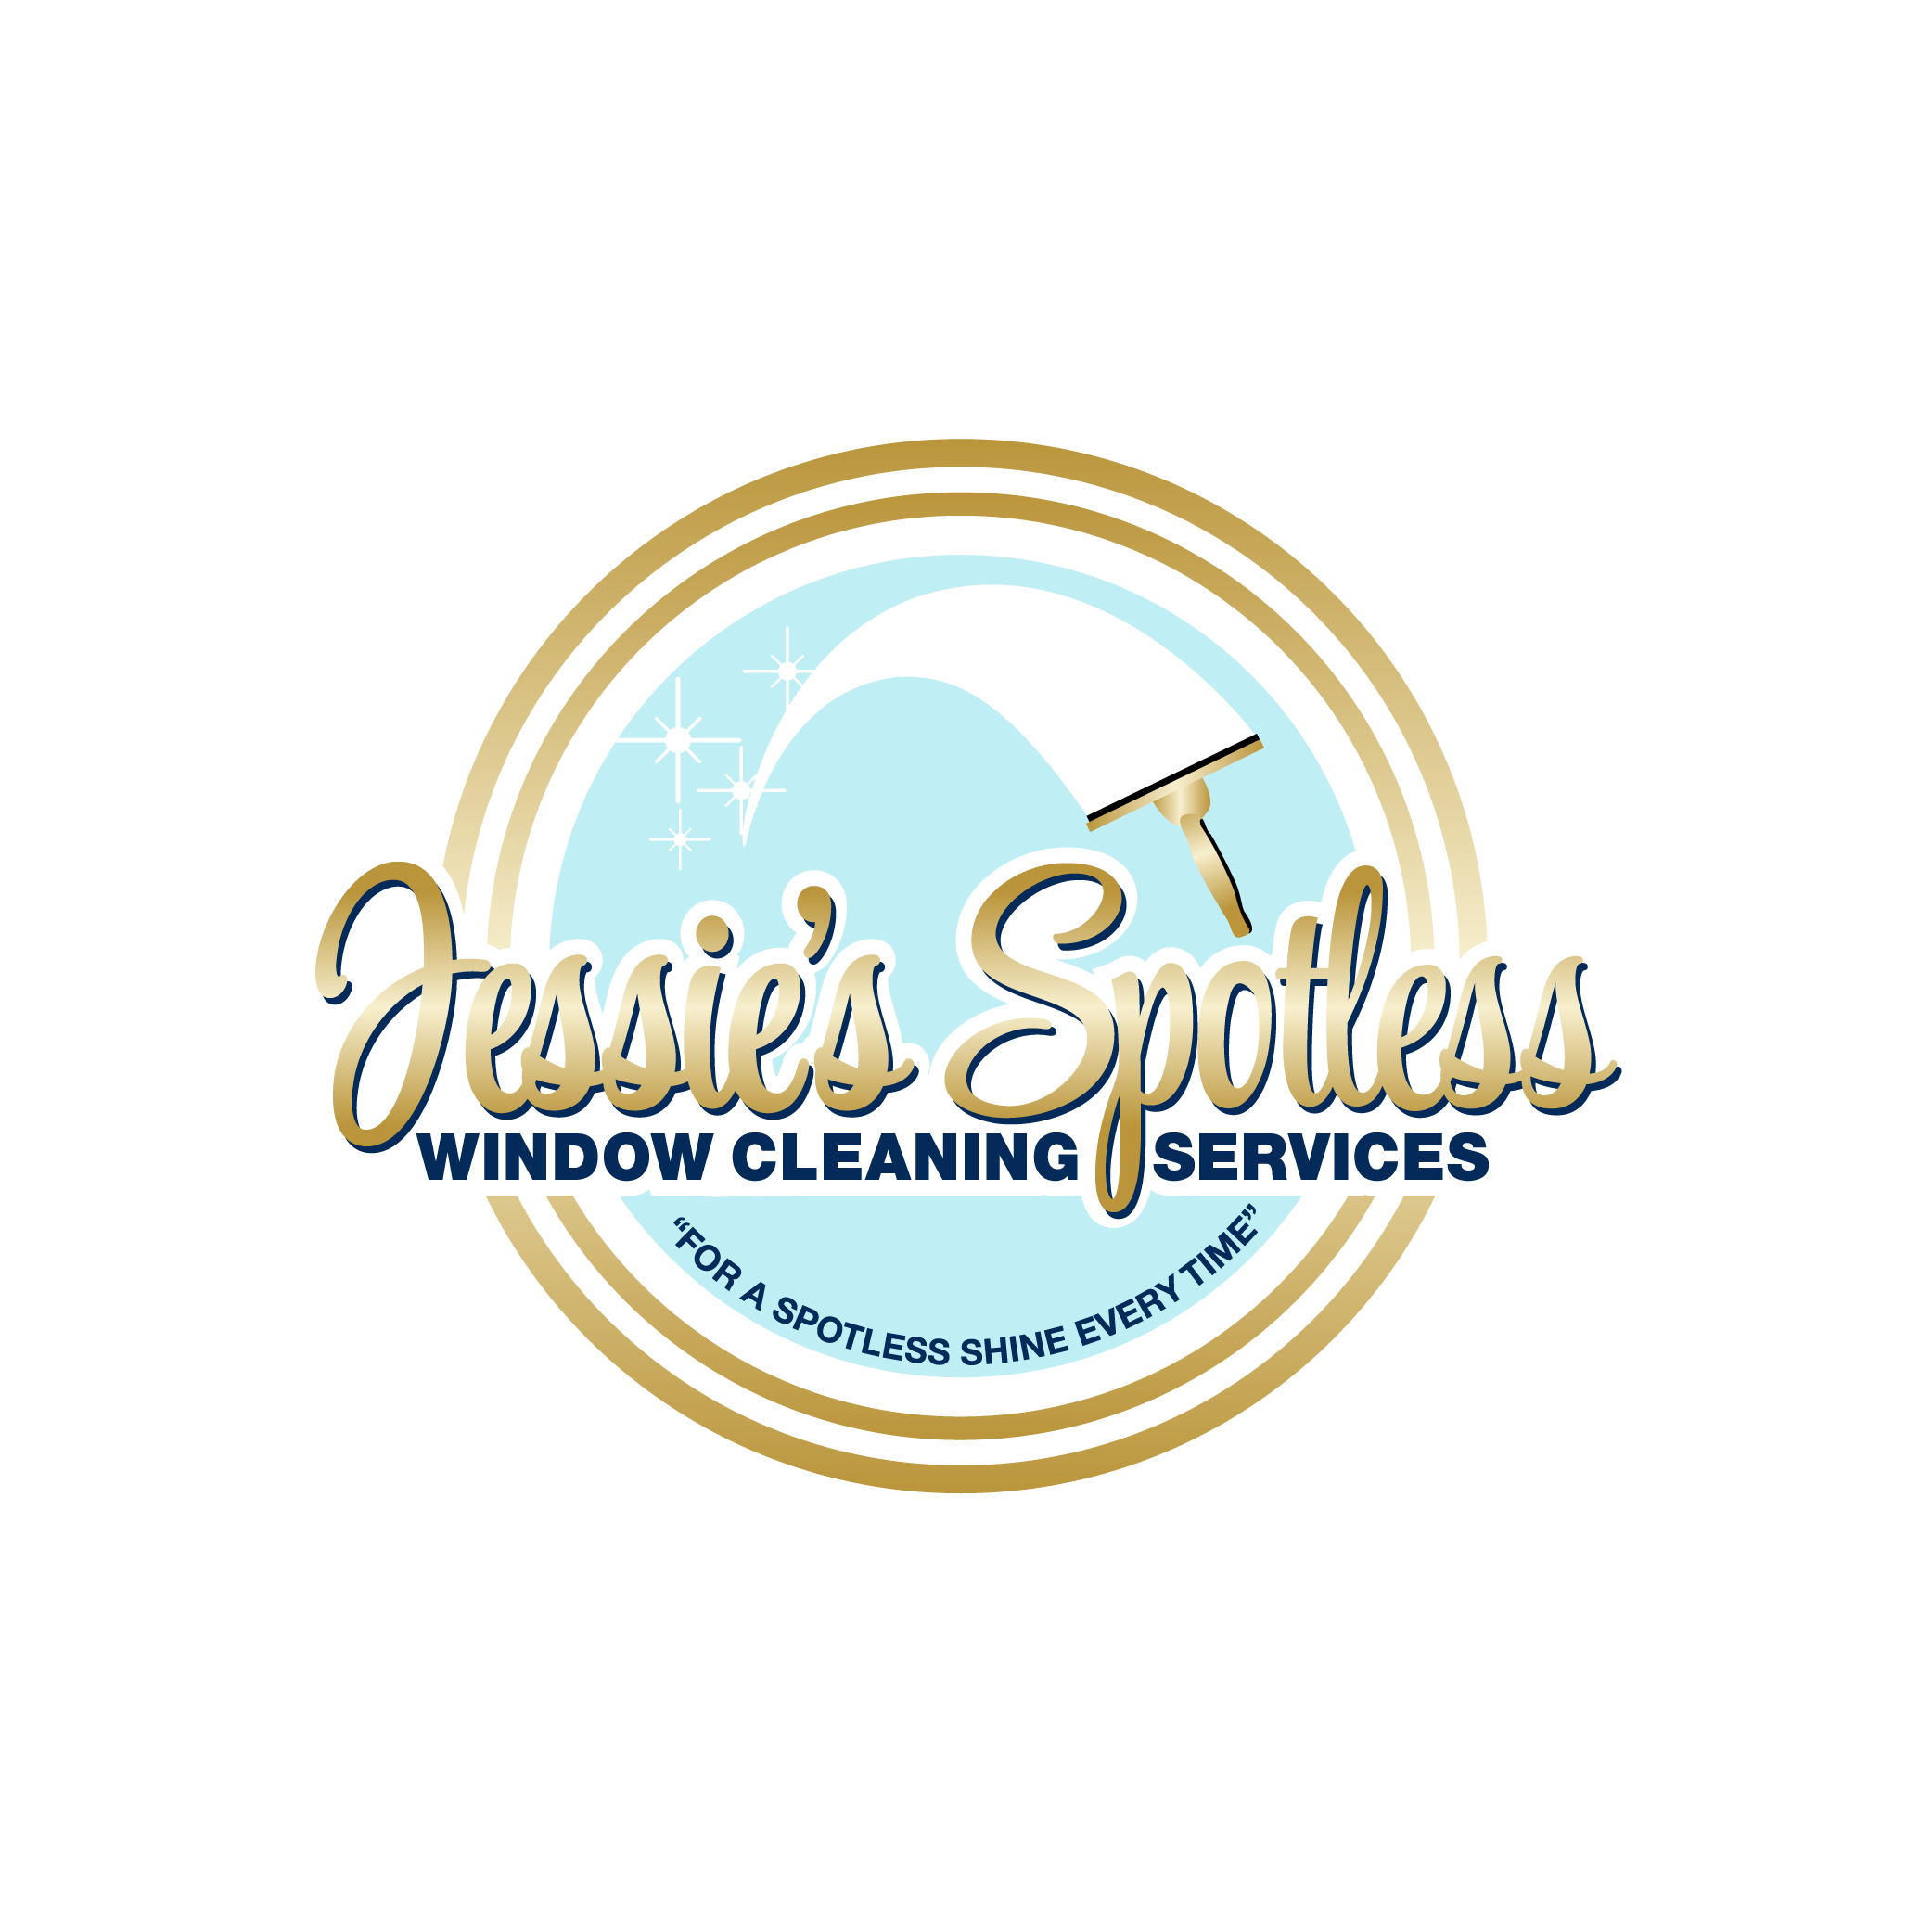 Jessie's Spotless Window Cleaning Services's logo